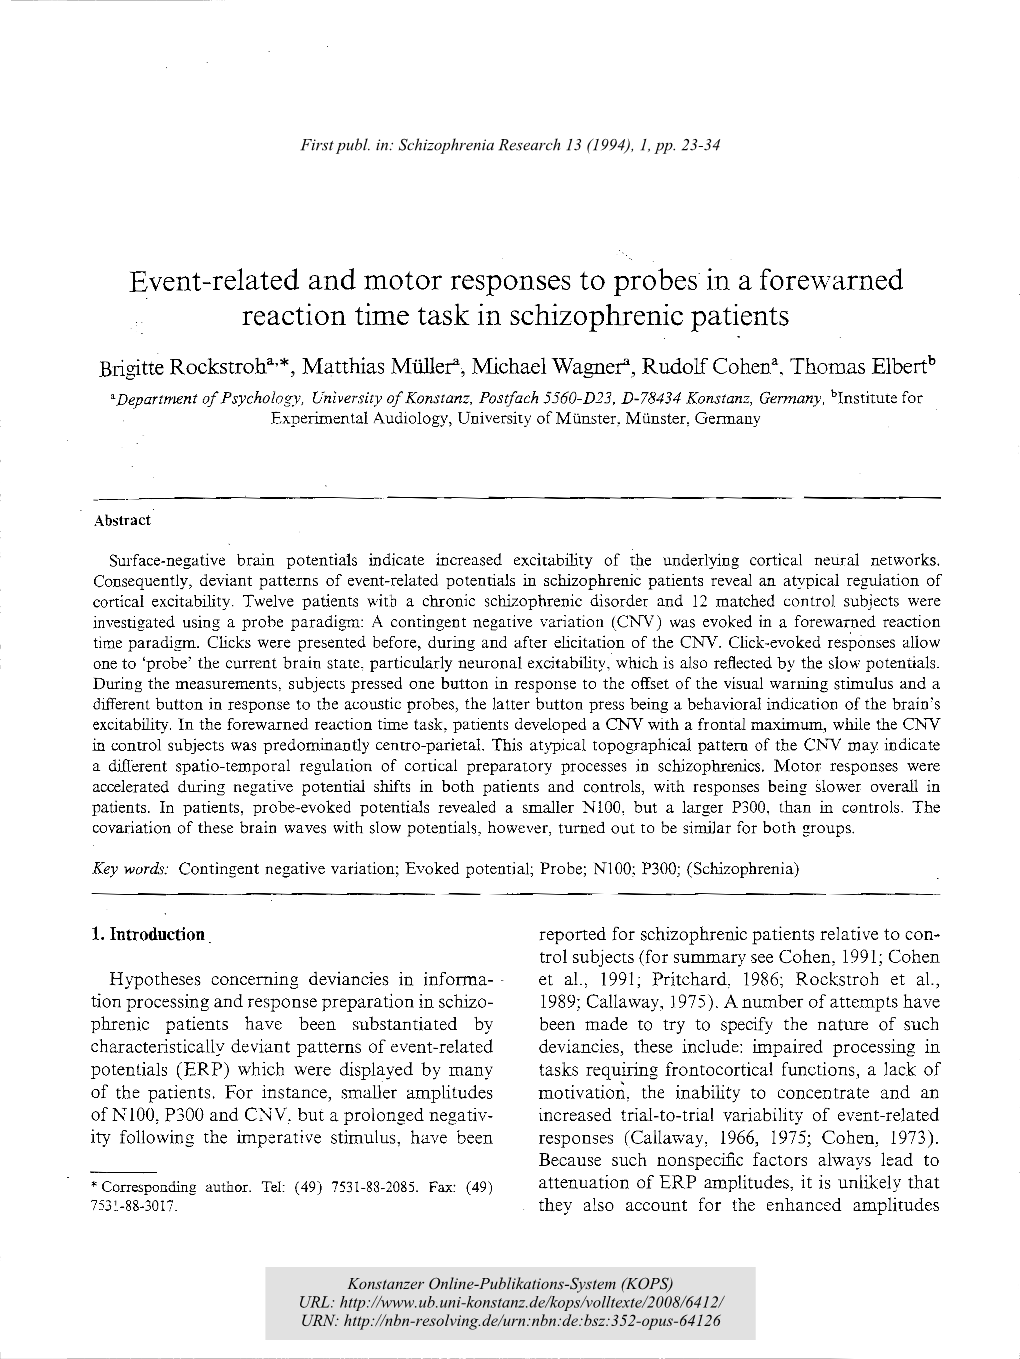 Event-Related and Motor Responses to Probes in a Forewarned Reaction